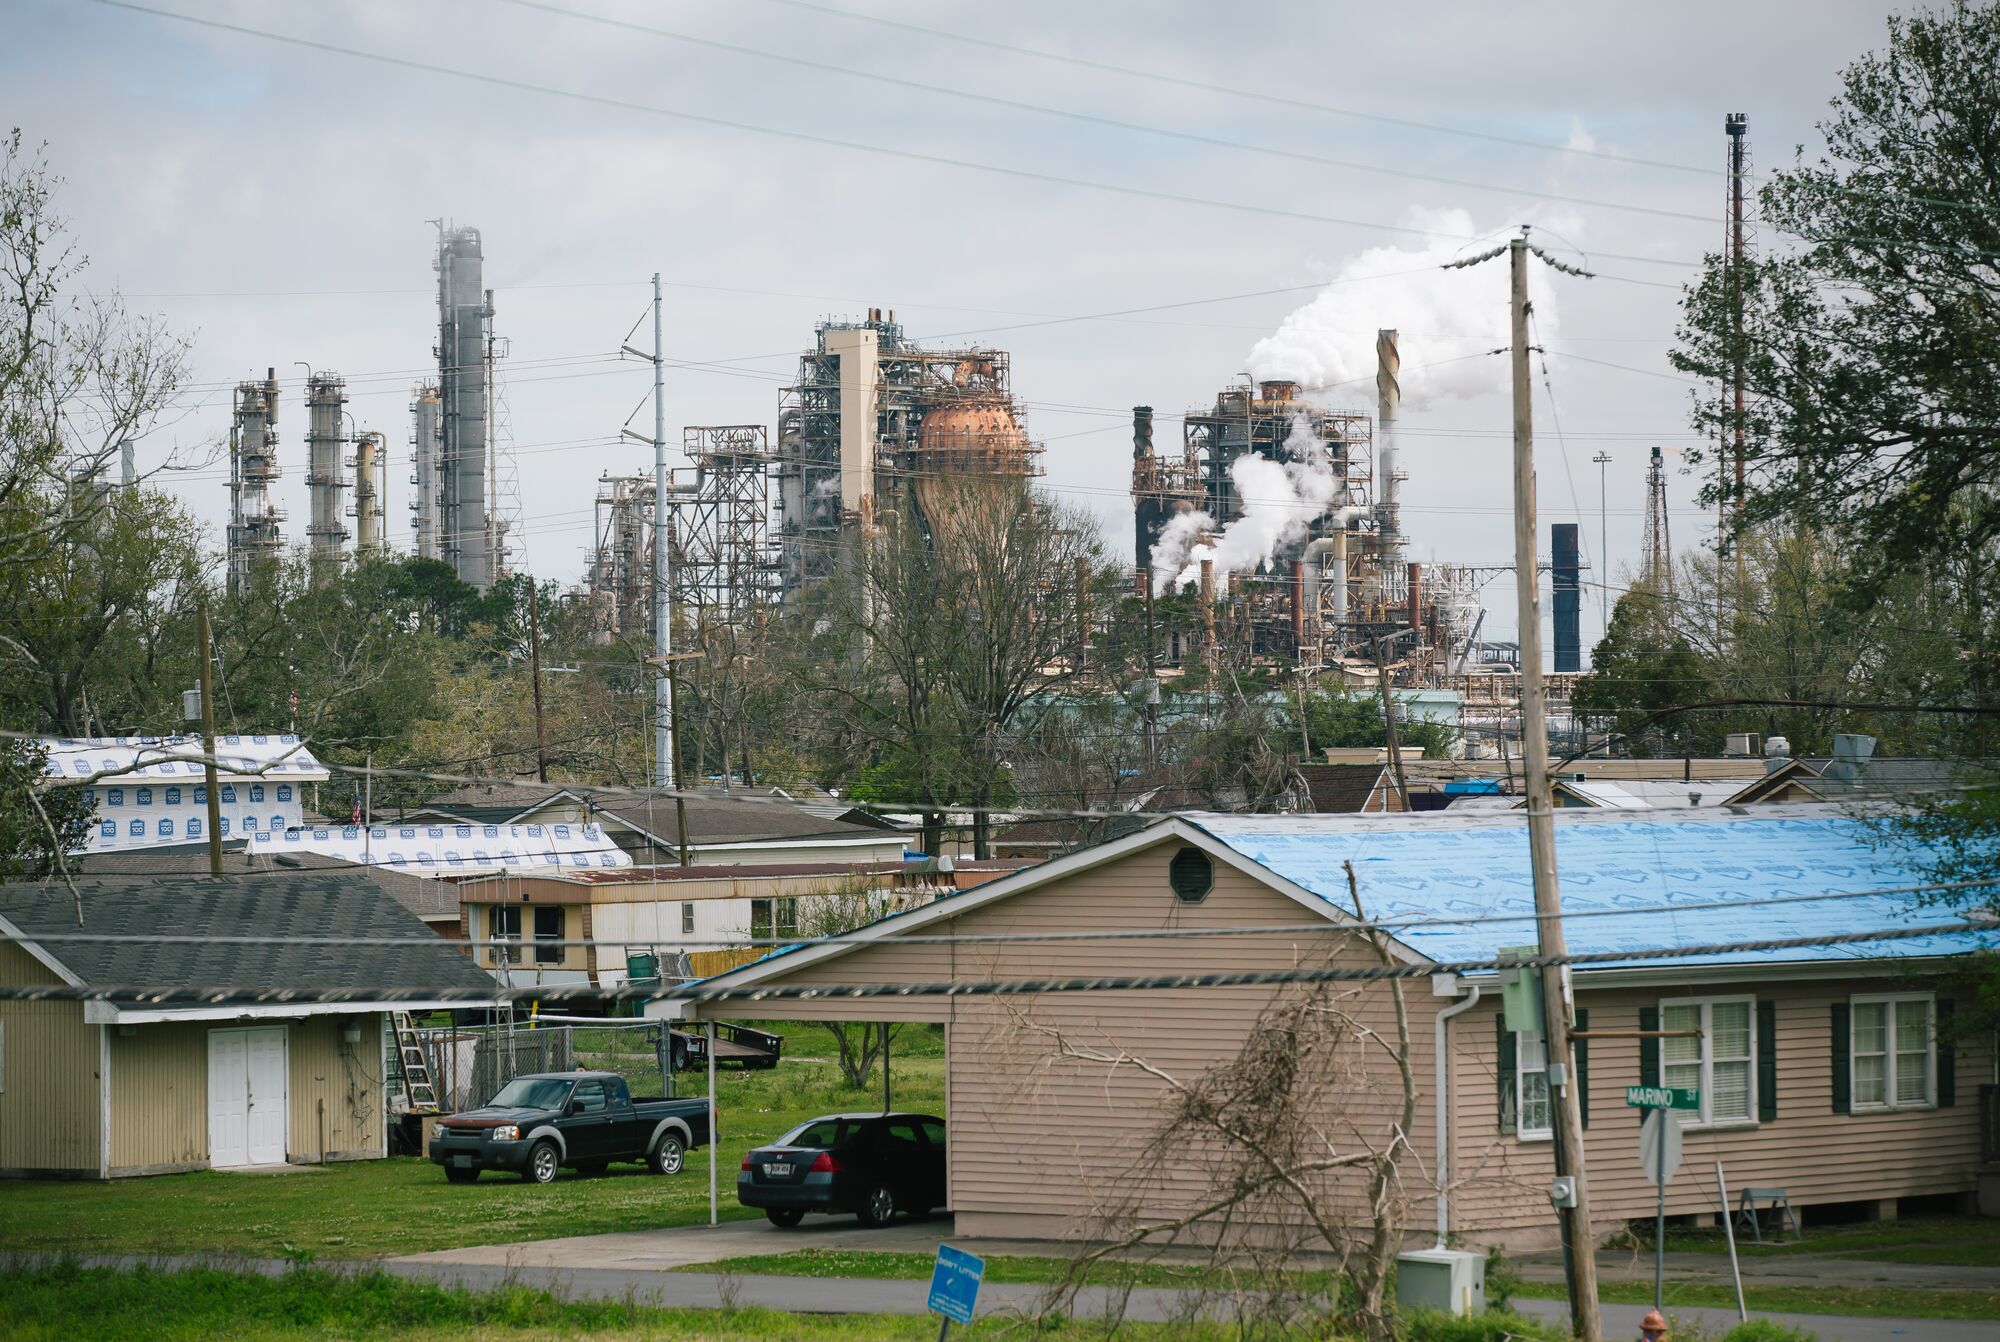 Homes are adjacent to a Shell refinery in Norco, Louisiana.